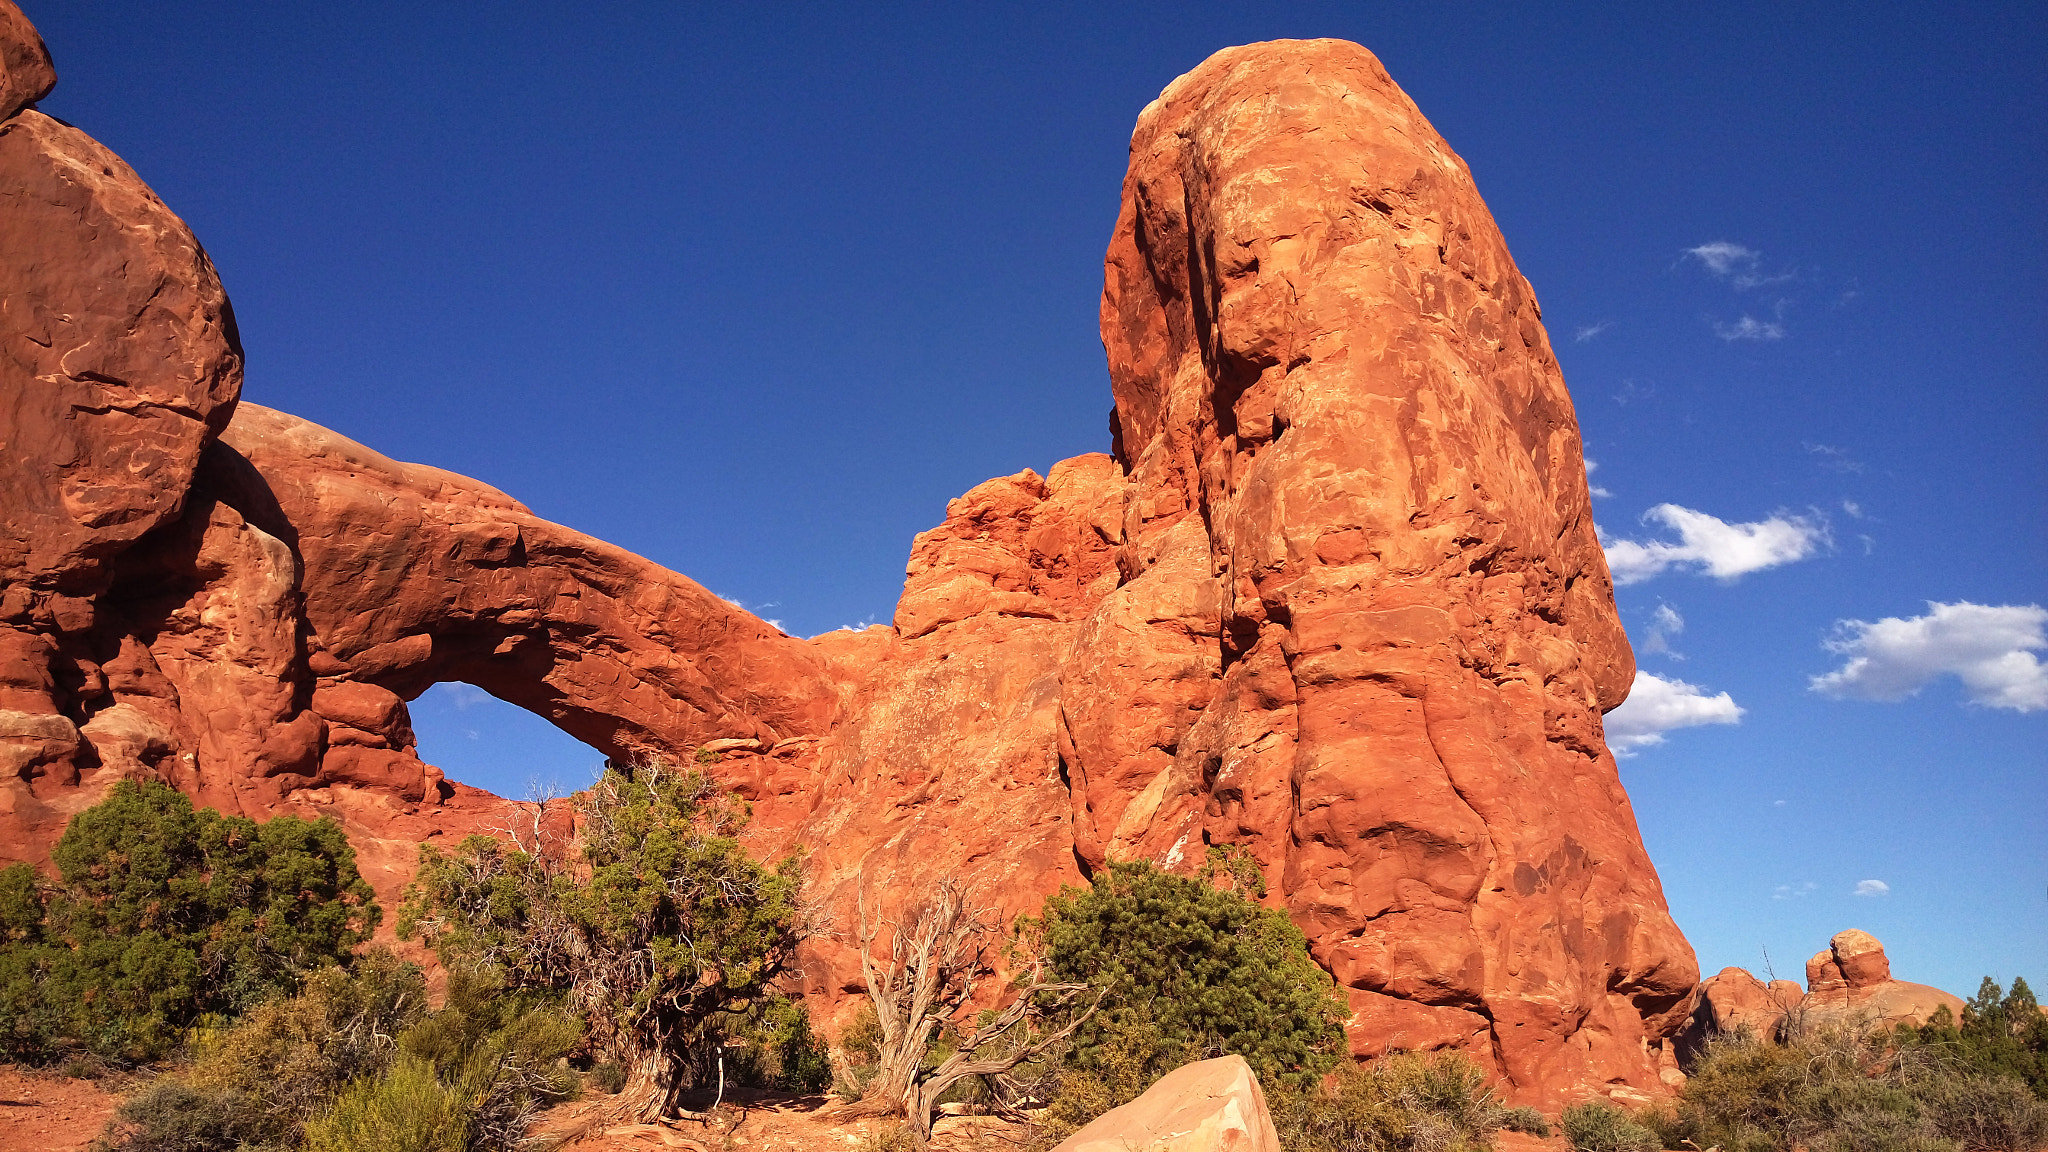 HTC ONE M9+ sample photo. Arches national park photography